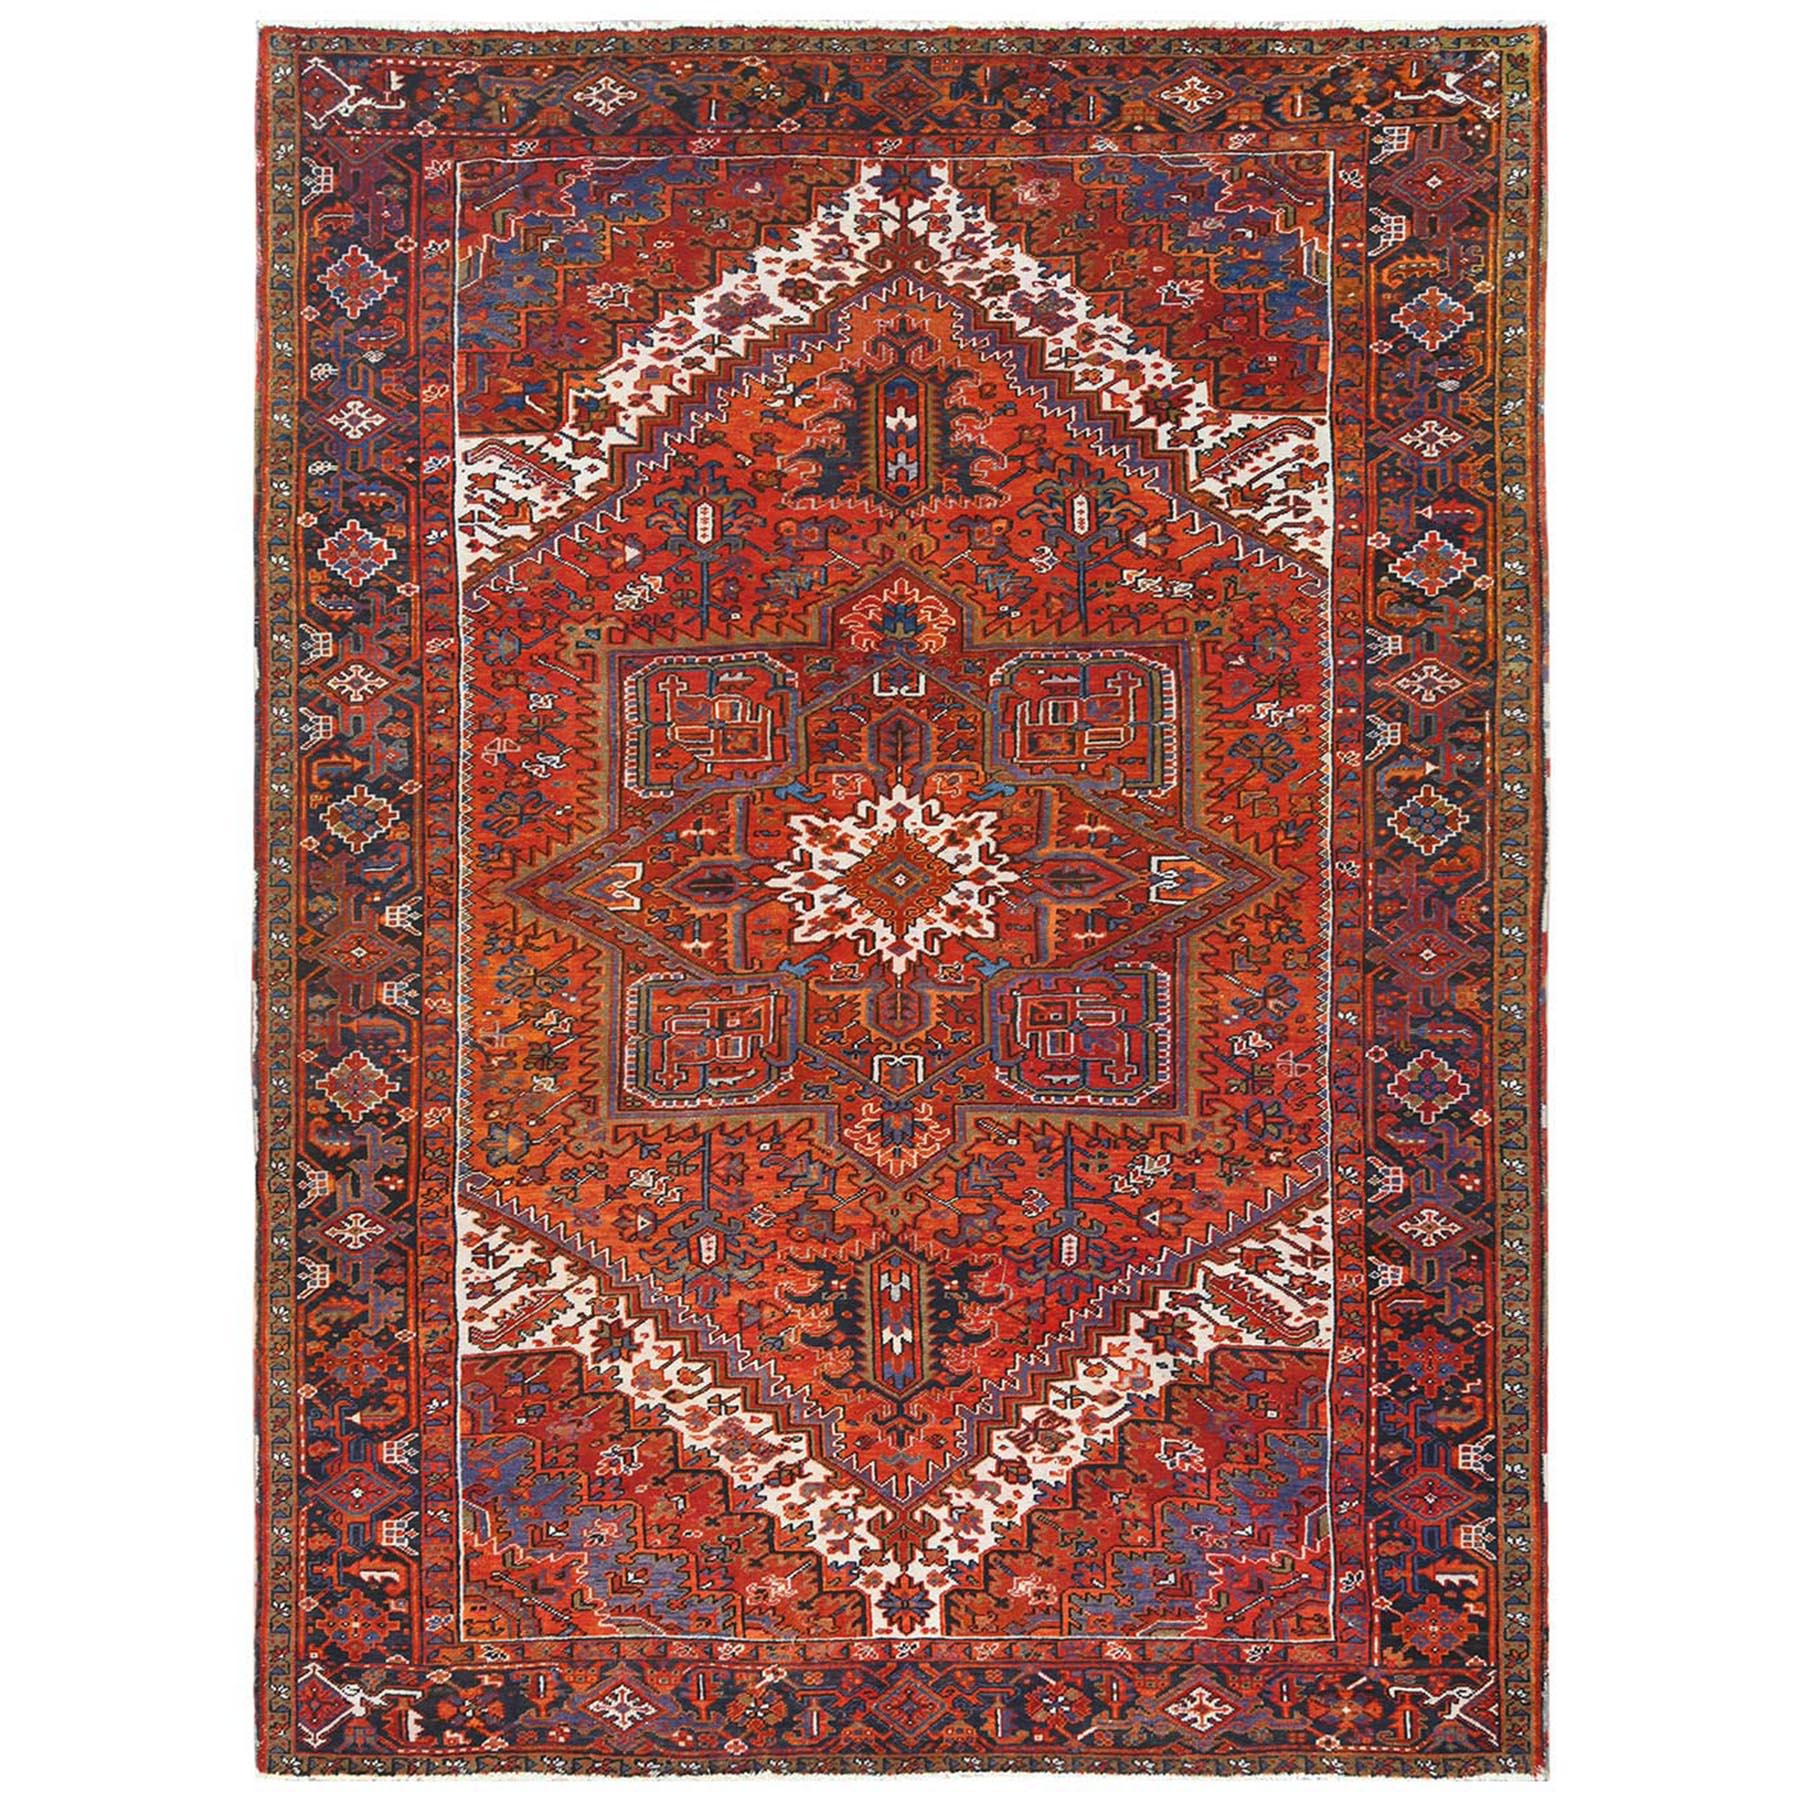  Wool Hand-Knotted Area Rug 9'4